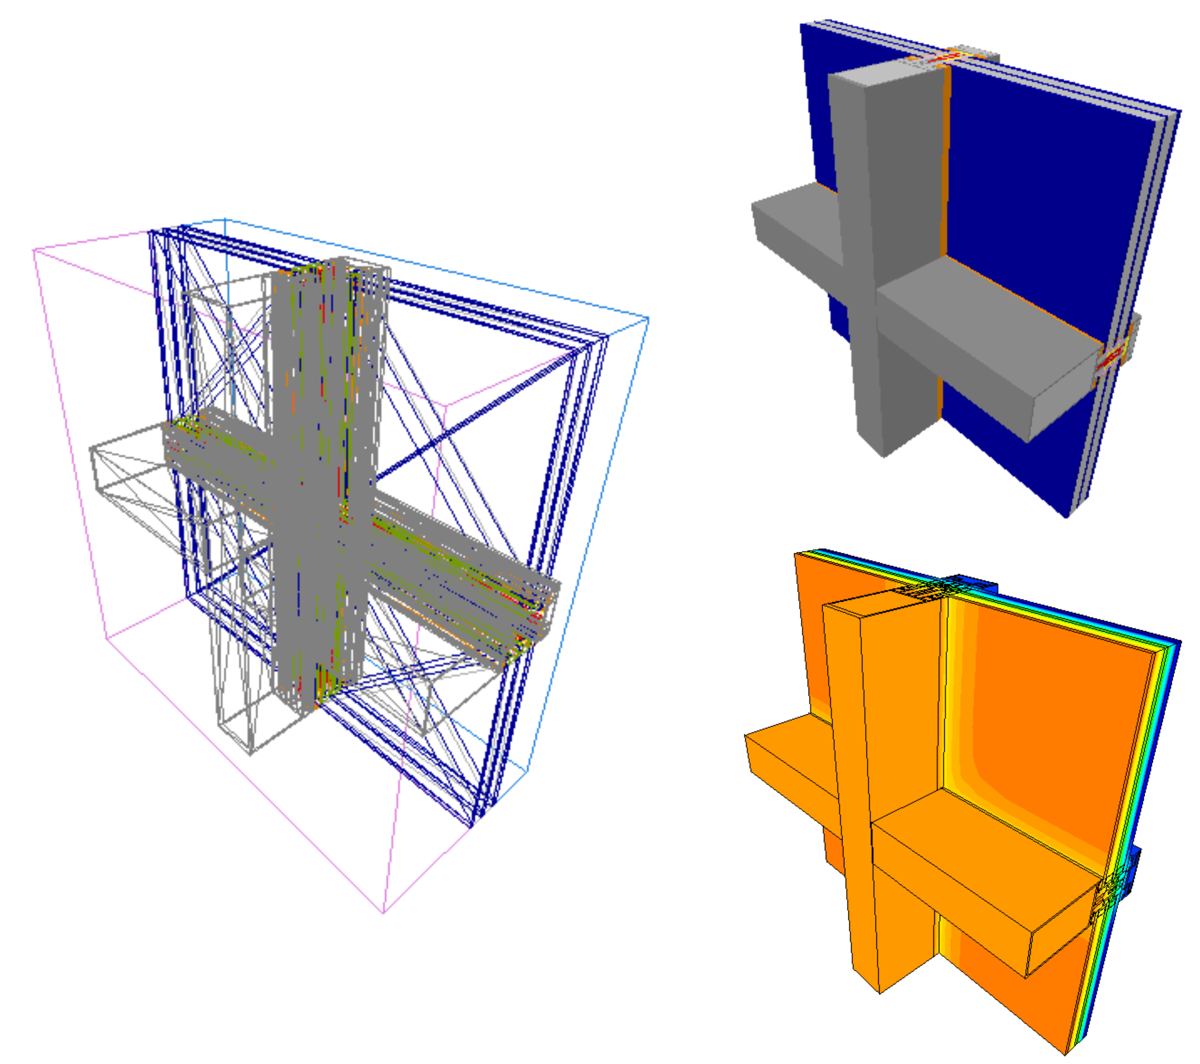 T-SLDc - Defining air cavities in STL- imported geometries - Structural Glazing